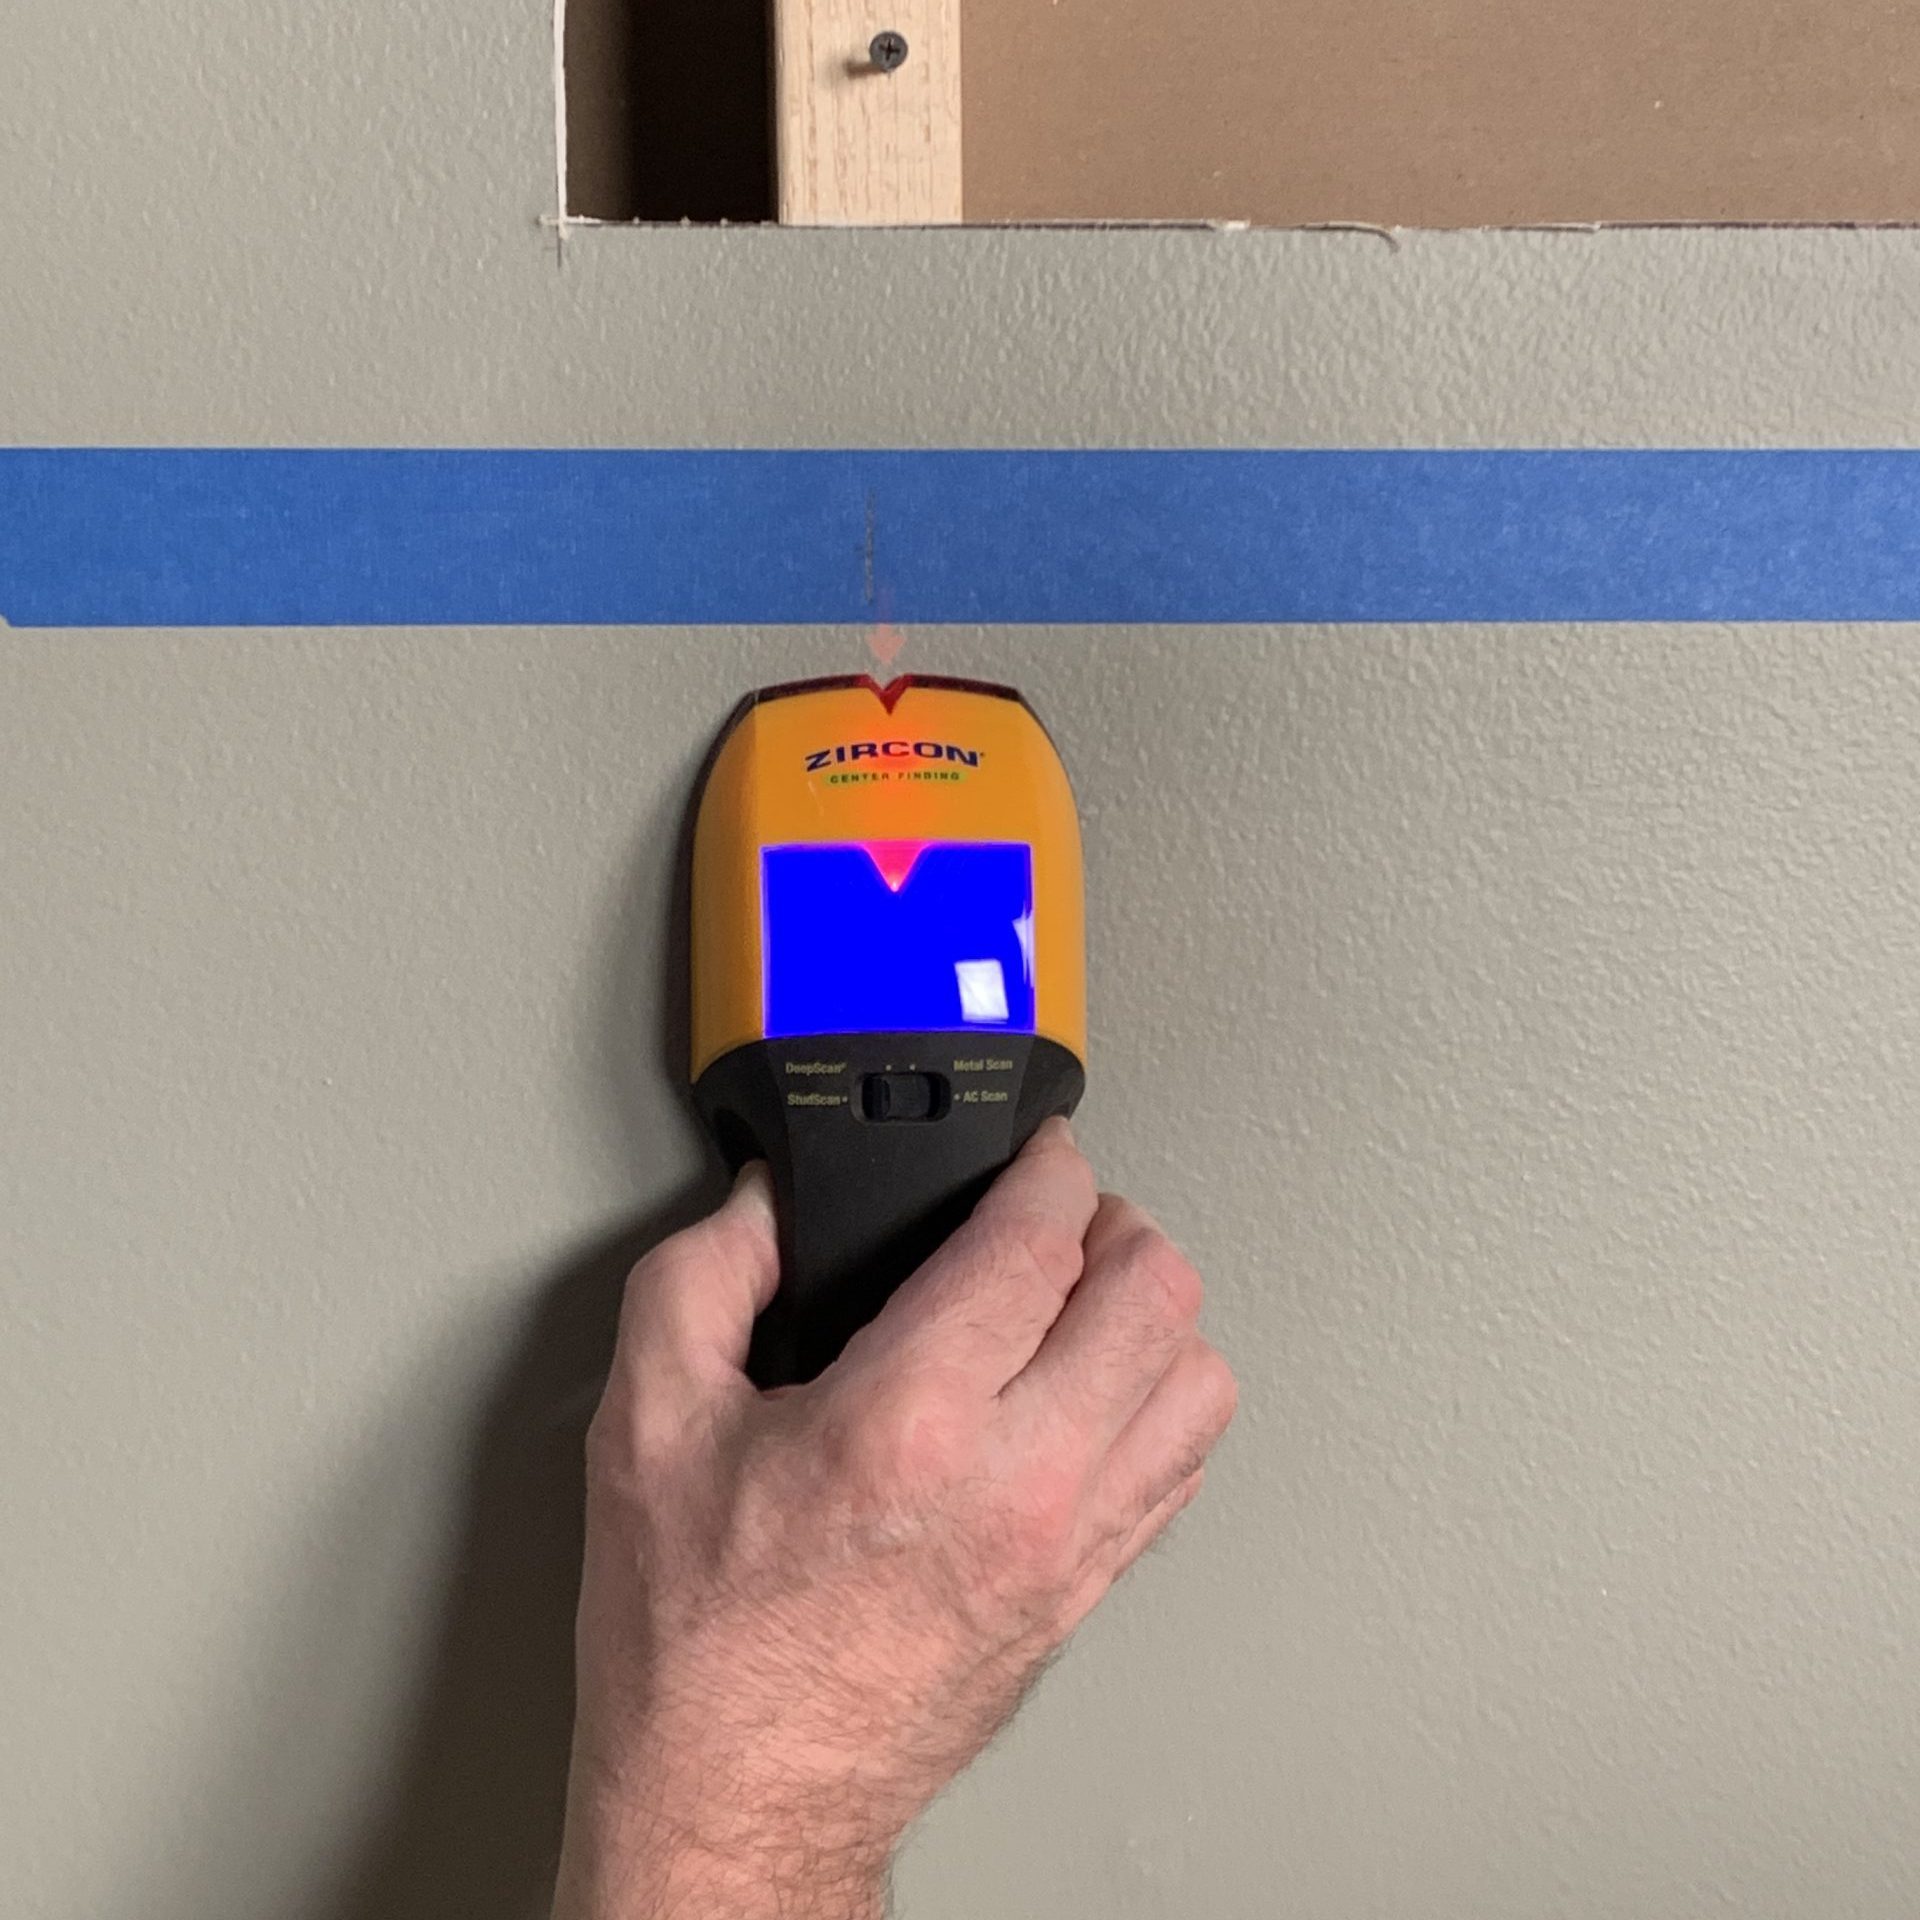 The StudBuddy Magnetic Stud Finder - Stud Finders And Scanning